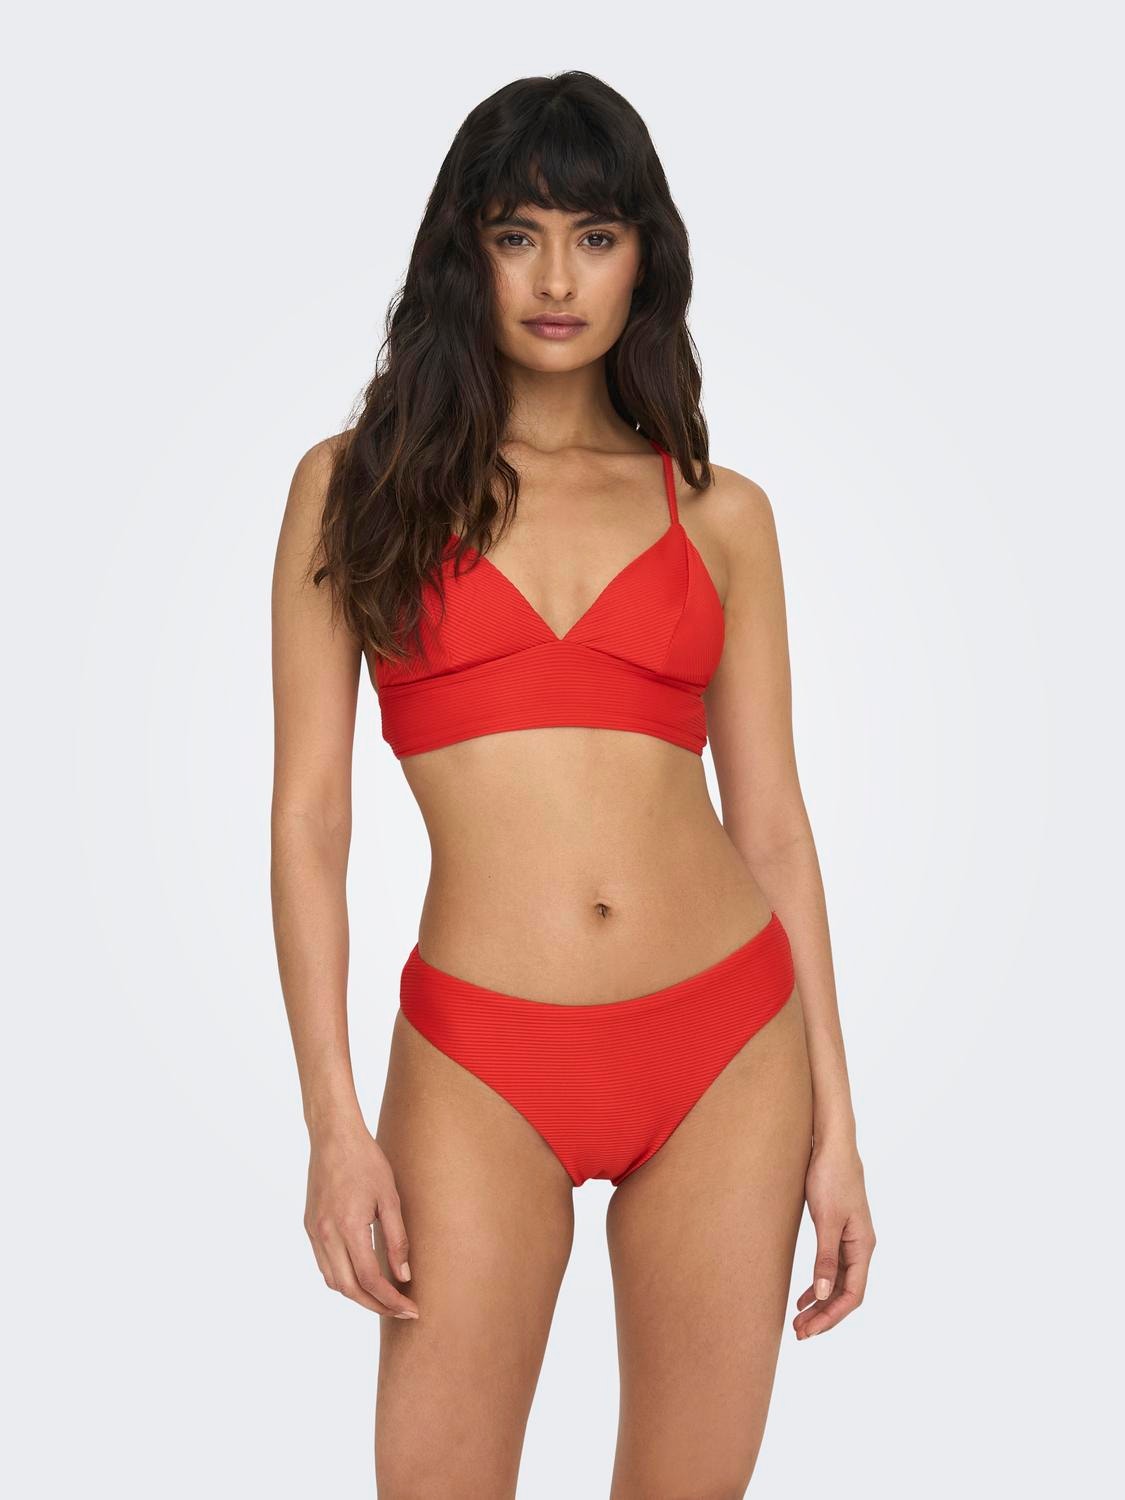 ONLY Niedrige Taille Verstellbare Träger Bademode -Fiery Red - 15304100